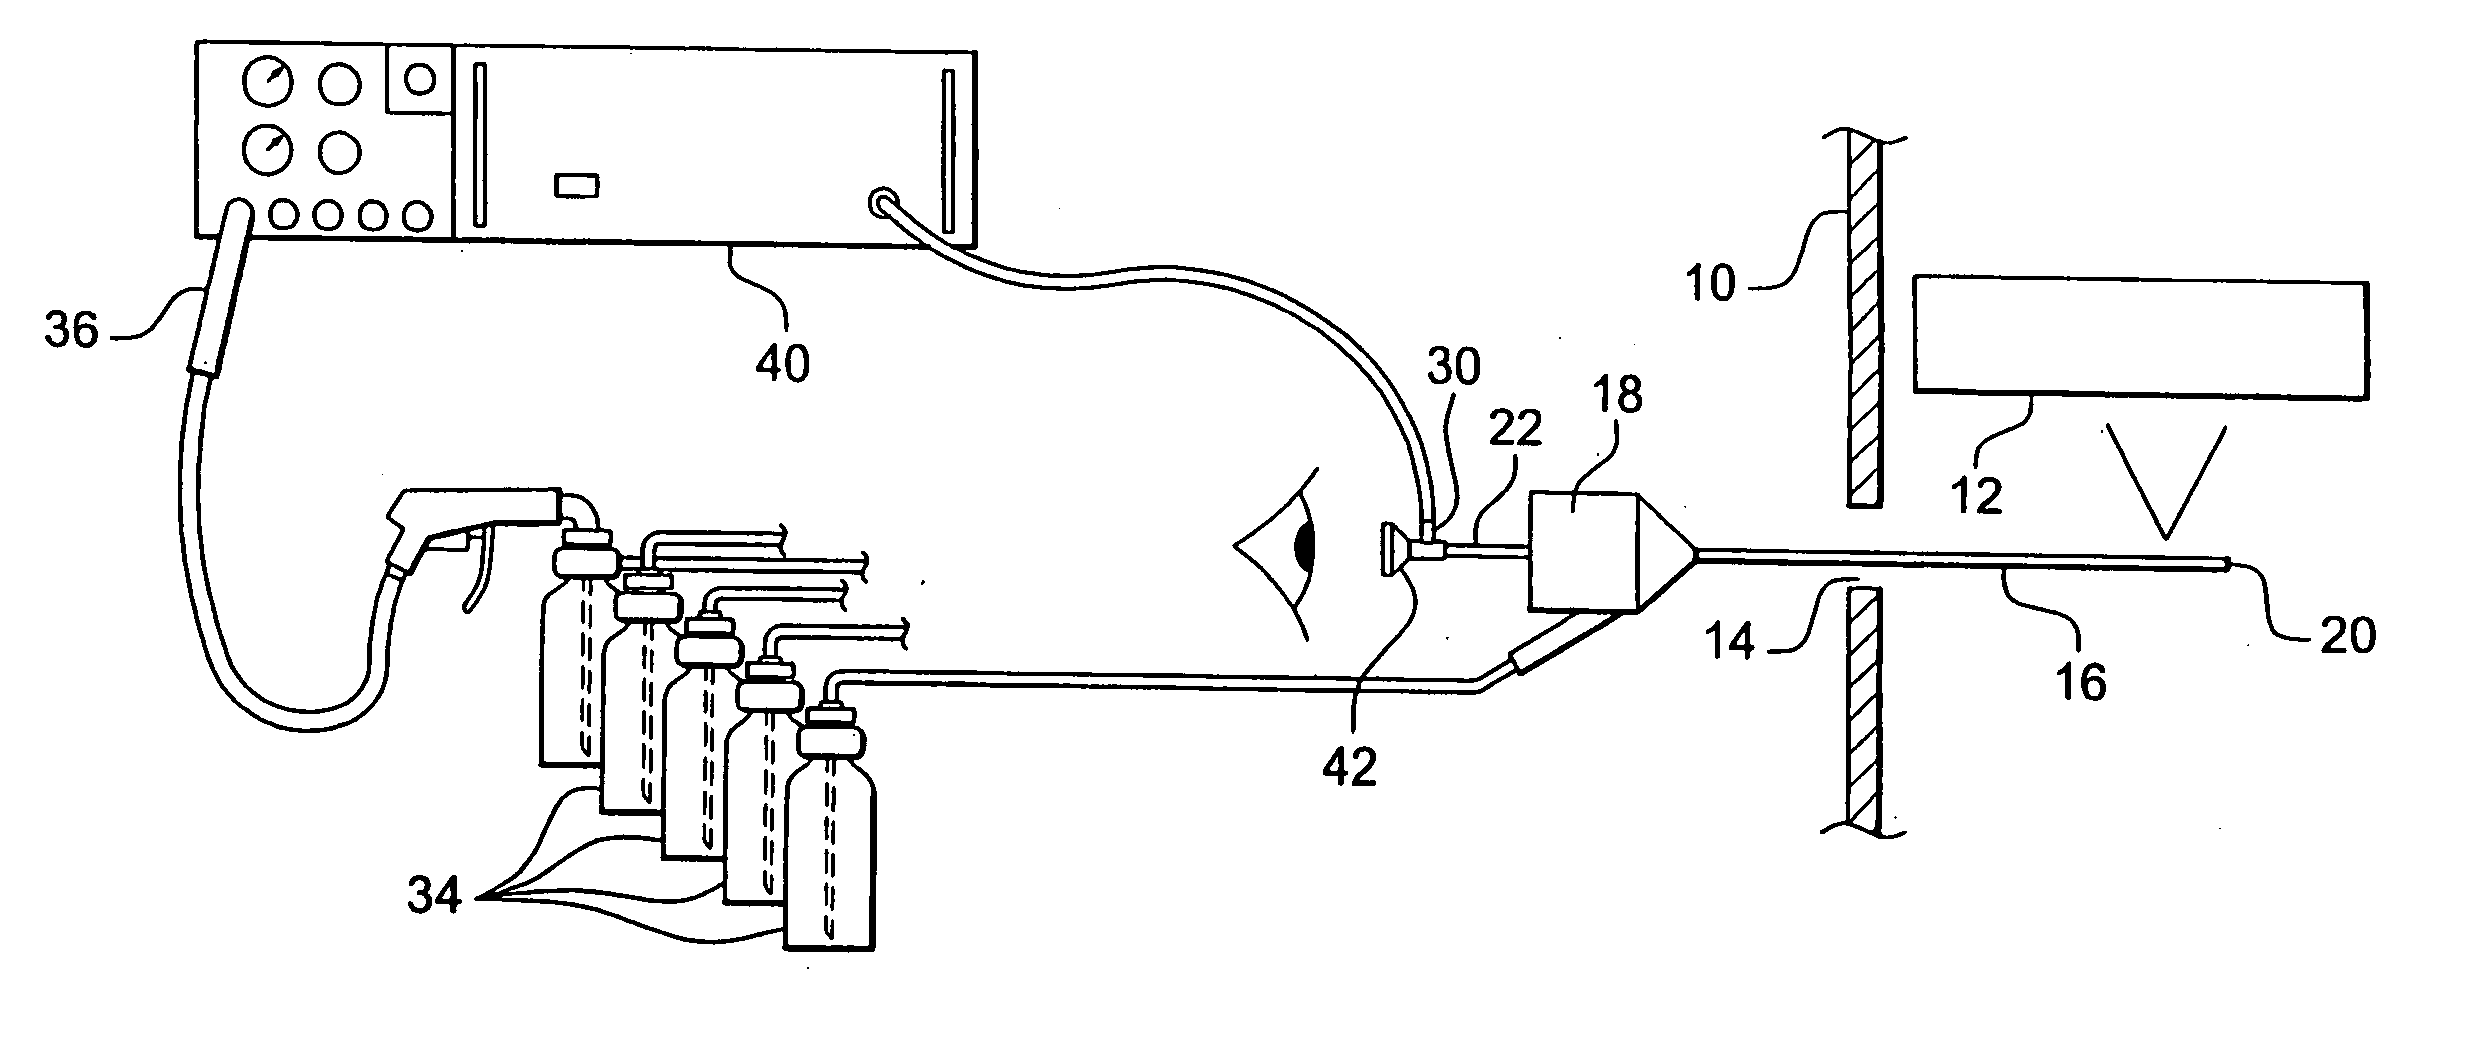 Apparatus for searching for and detecting defects in parts by endoscopy